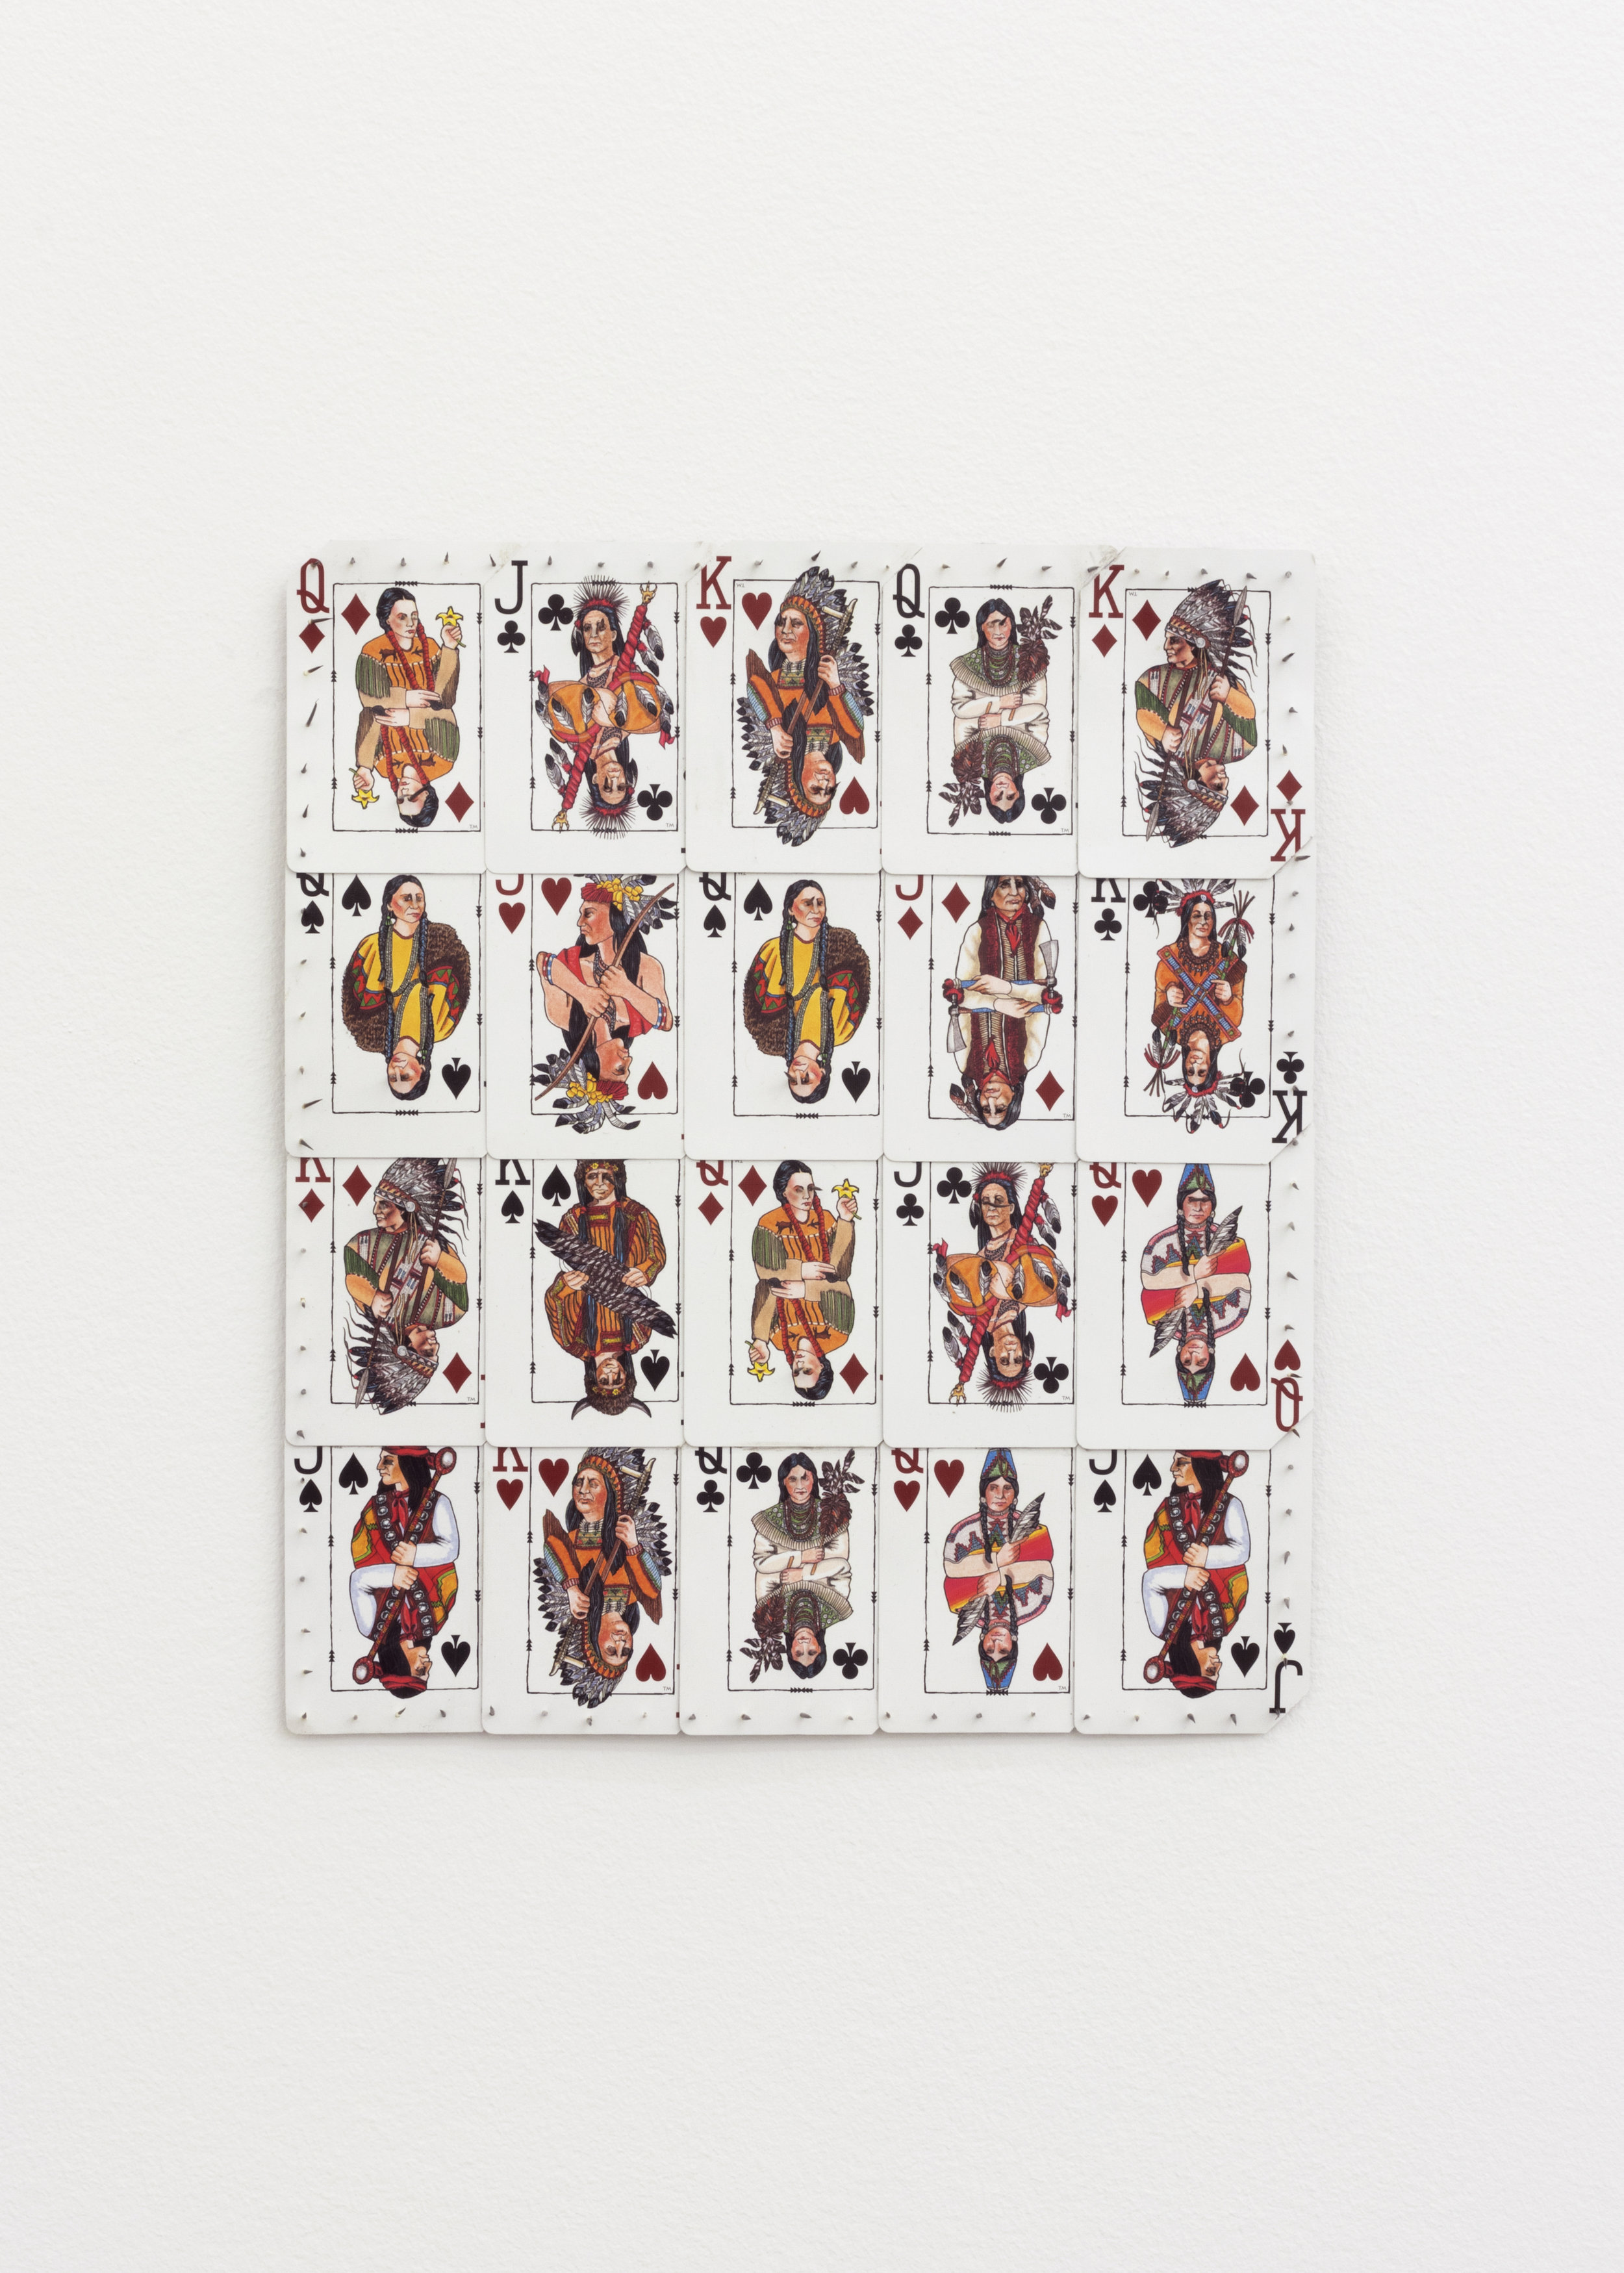   Treaty No. 2 , 2018, Fire Rock Casino playing cards, porcupine quills, 12 3/4 x 101/2 in. 